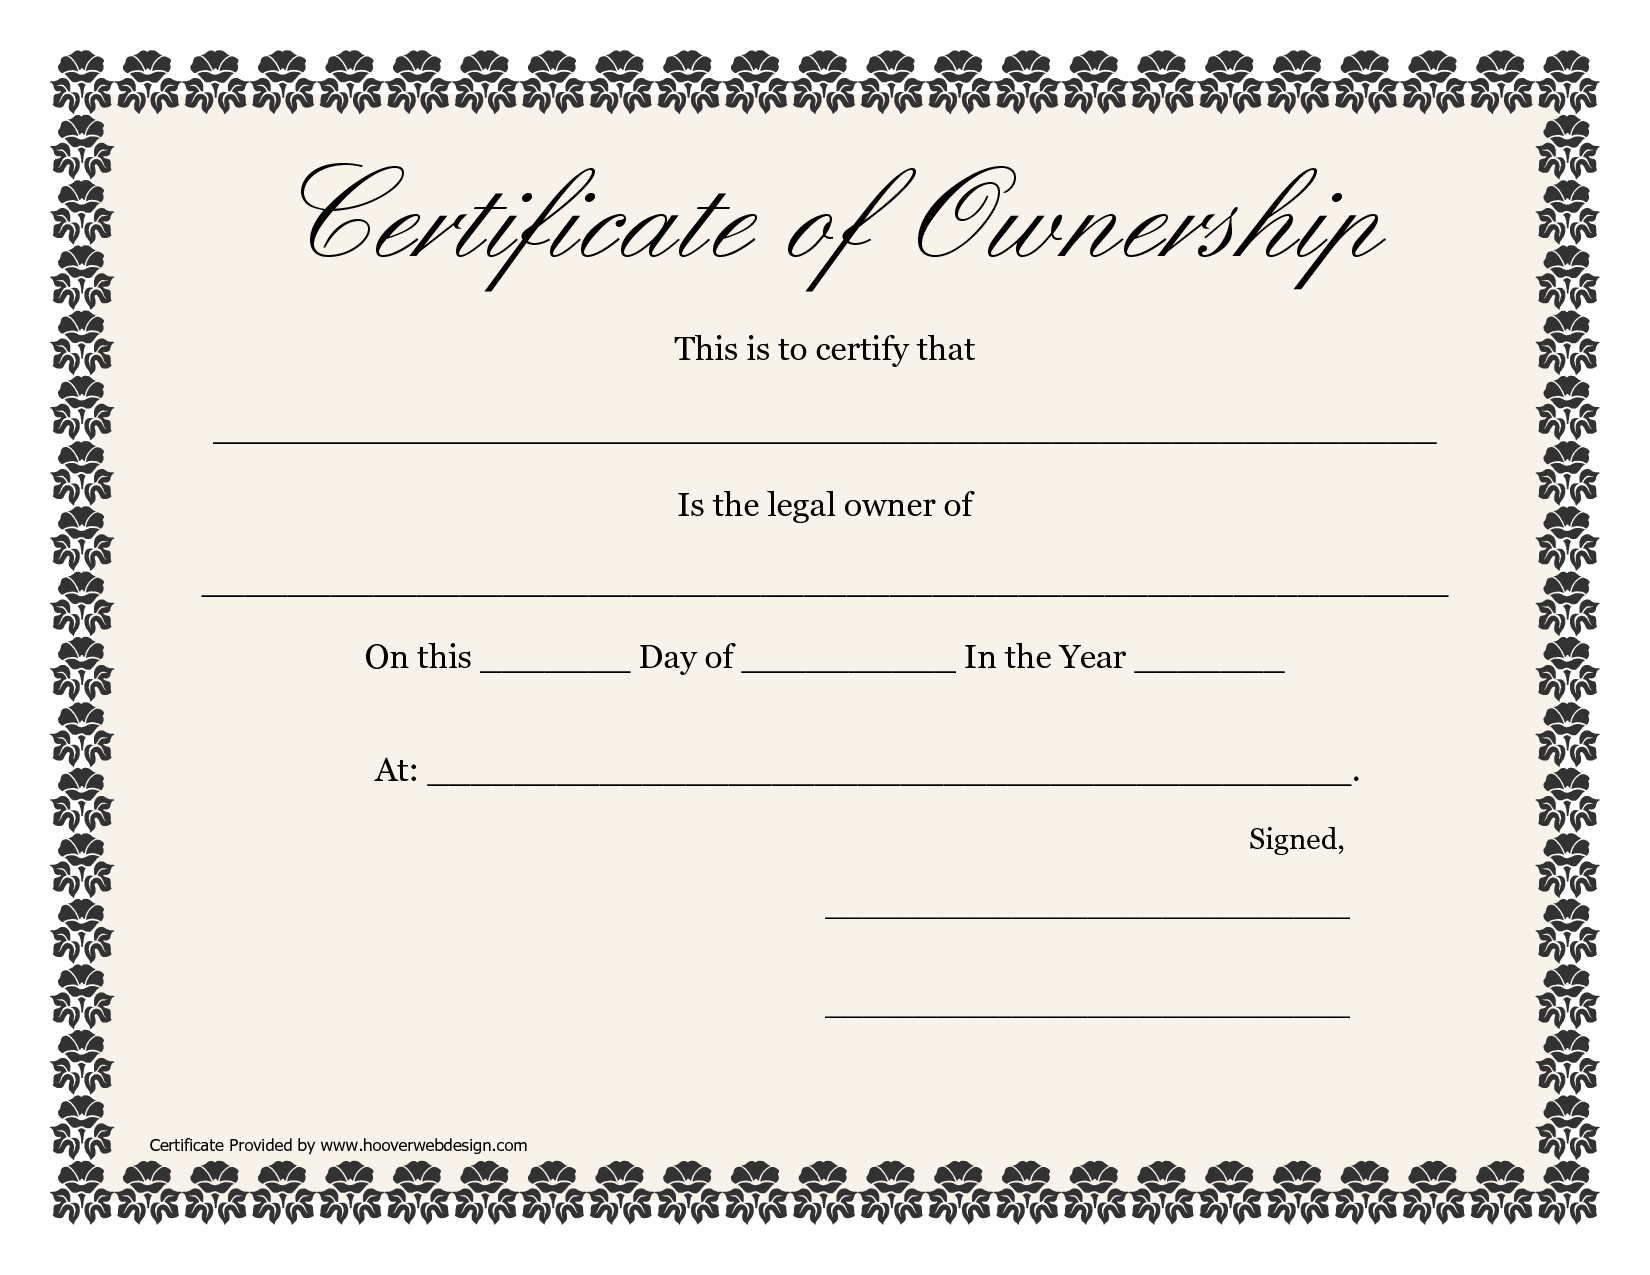 ❤️5+ Free Sample Of Certificate Of Ownership Form Template❤️ With Regard To Ownership Certificate Template